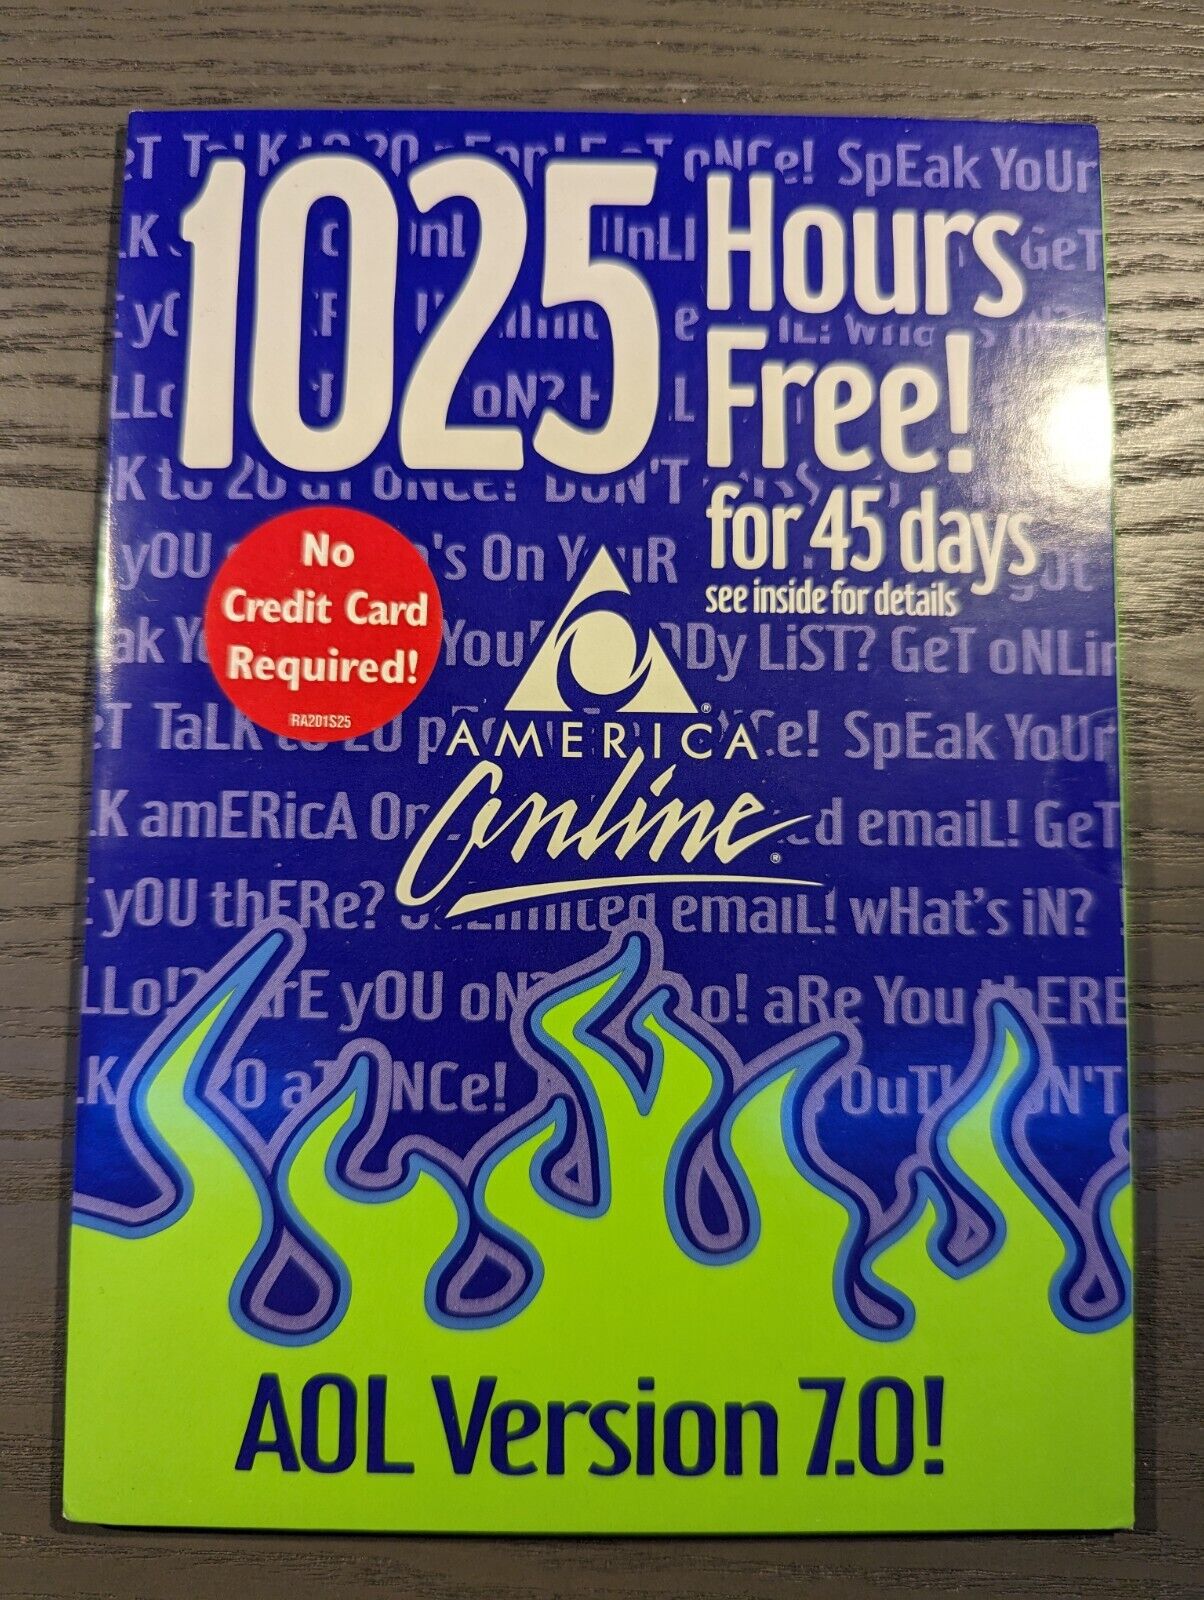 AOL CD Version 7.0 - 1025 Hours Free for 45 Days - New Sealed - Vintage